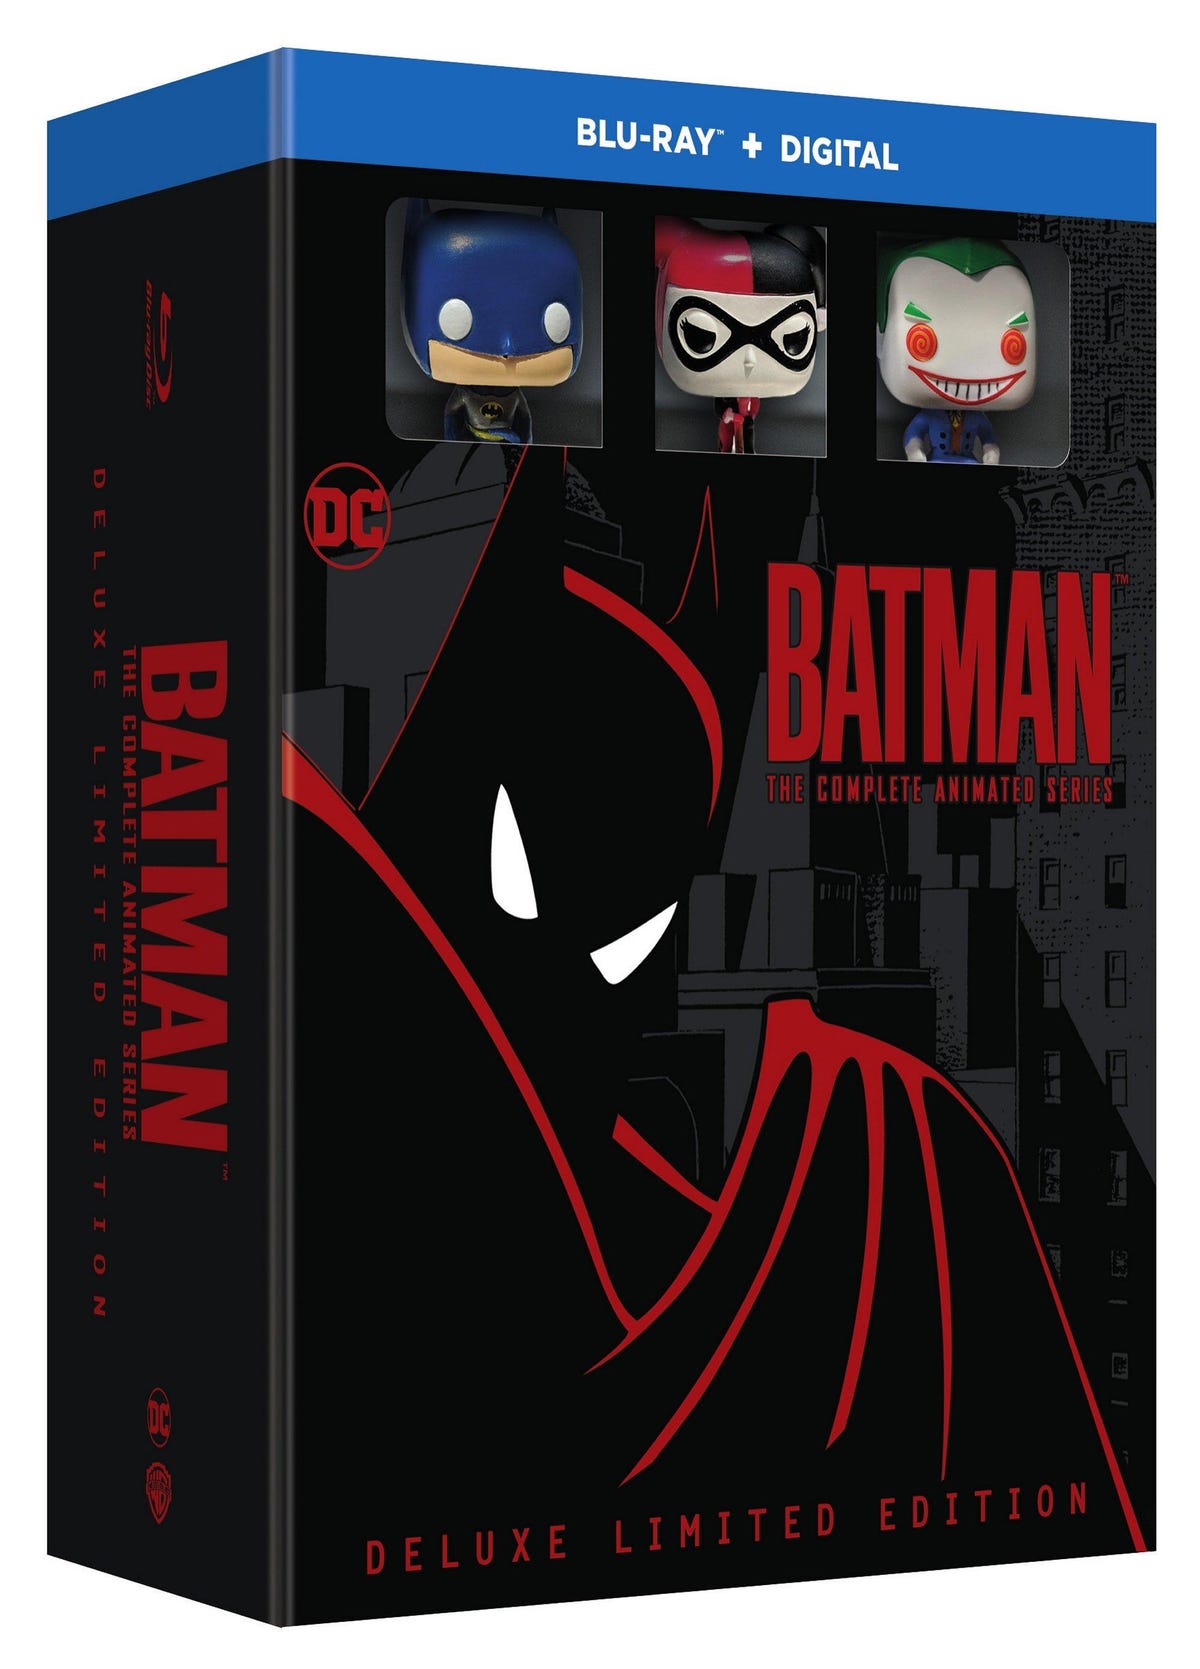 Batman: The Animated Series hits Blu-ray in October - CNET